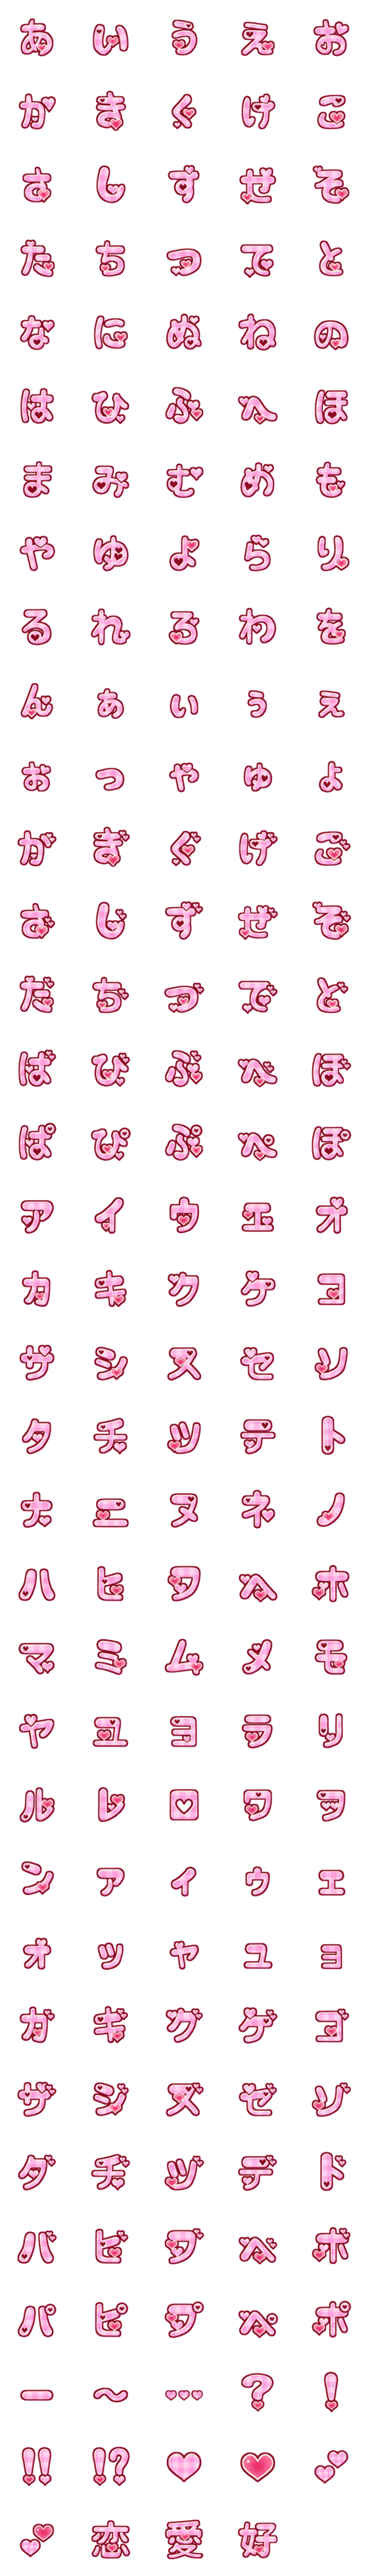 [LINE絵文字]ハート文字の画像一覧